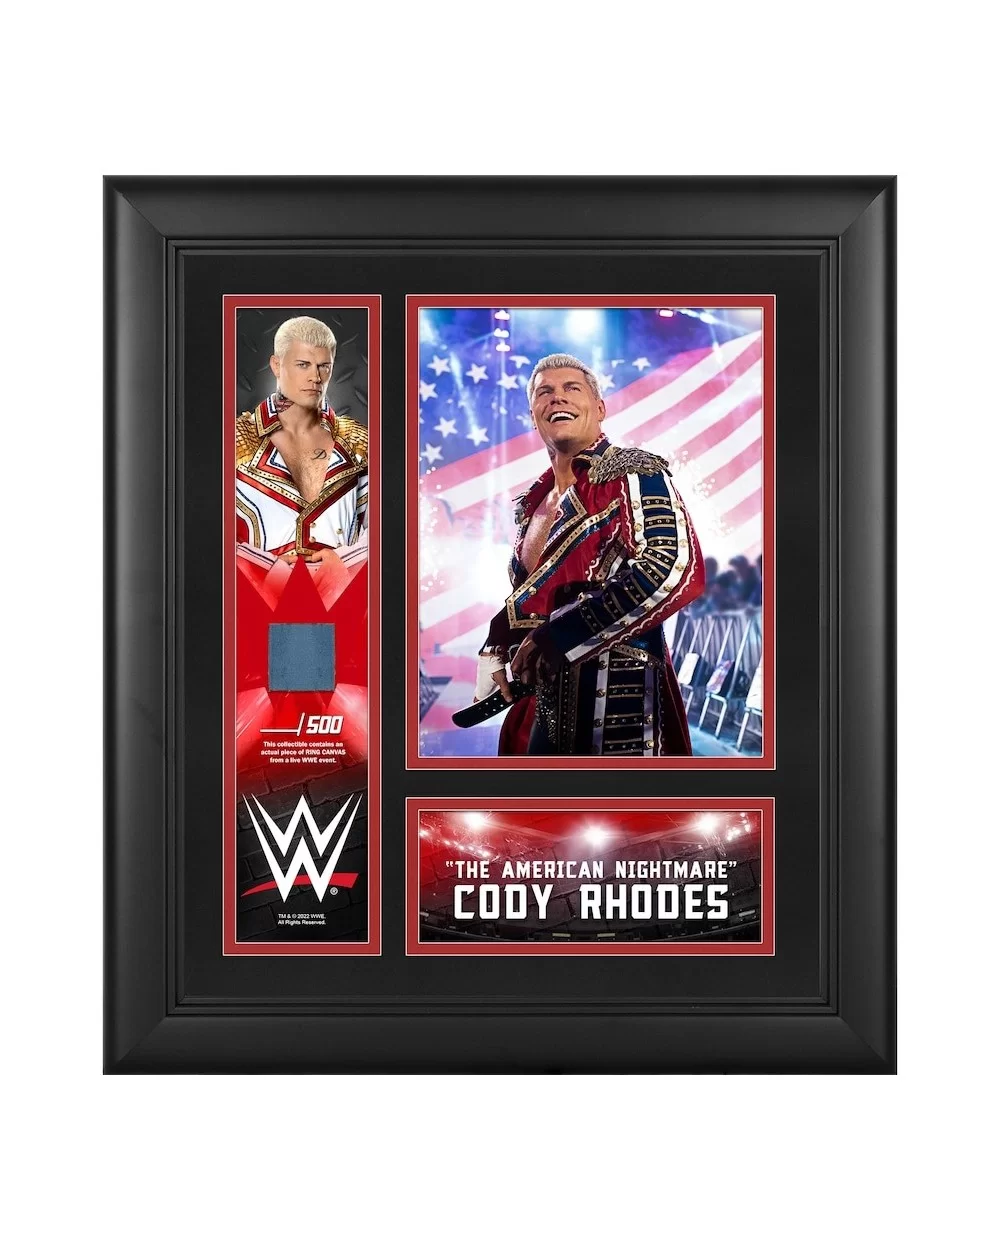 Cody Rhodes Framed 15" x 17" Collage with a Piece of Match-Used Canvas - Limited Edition of 500 $22.40 Collectibles